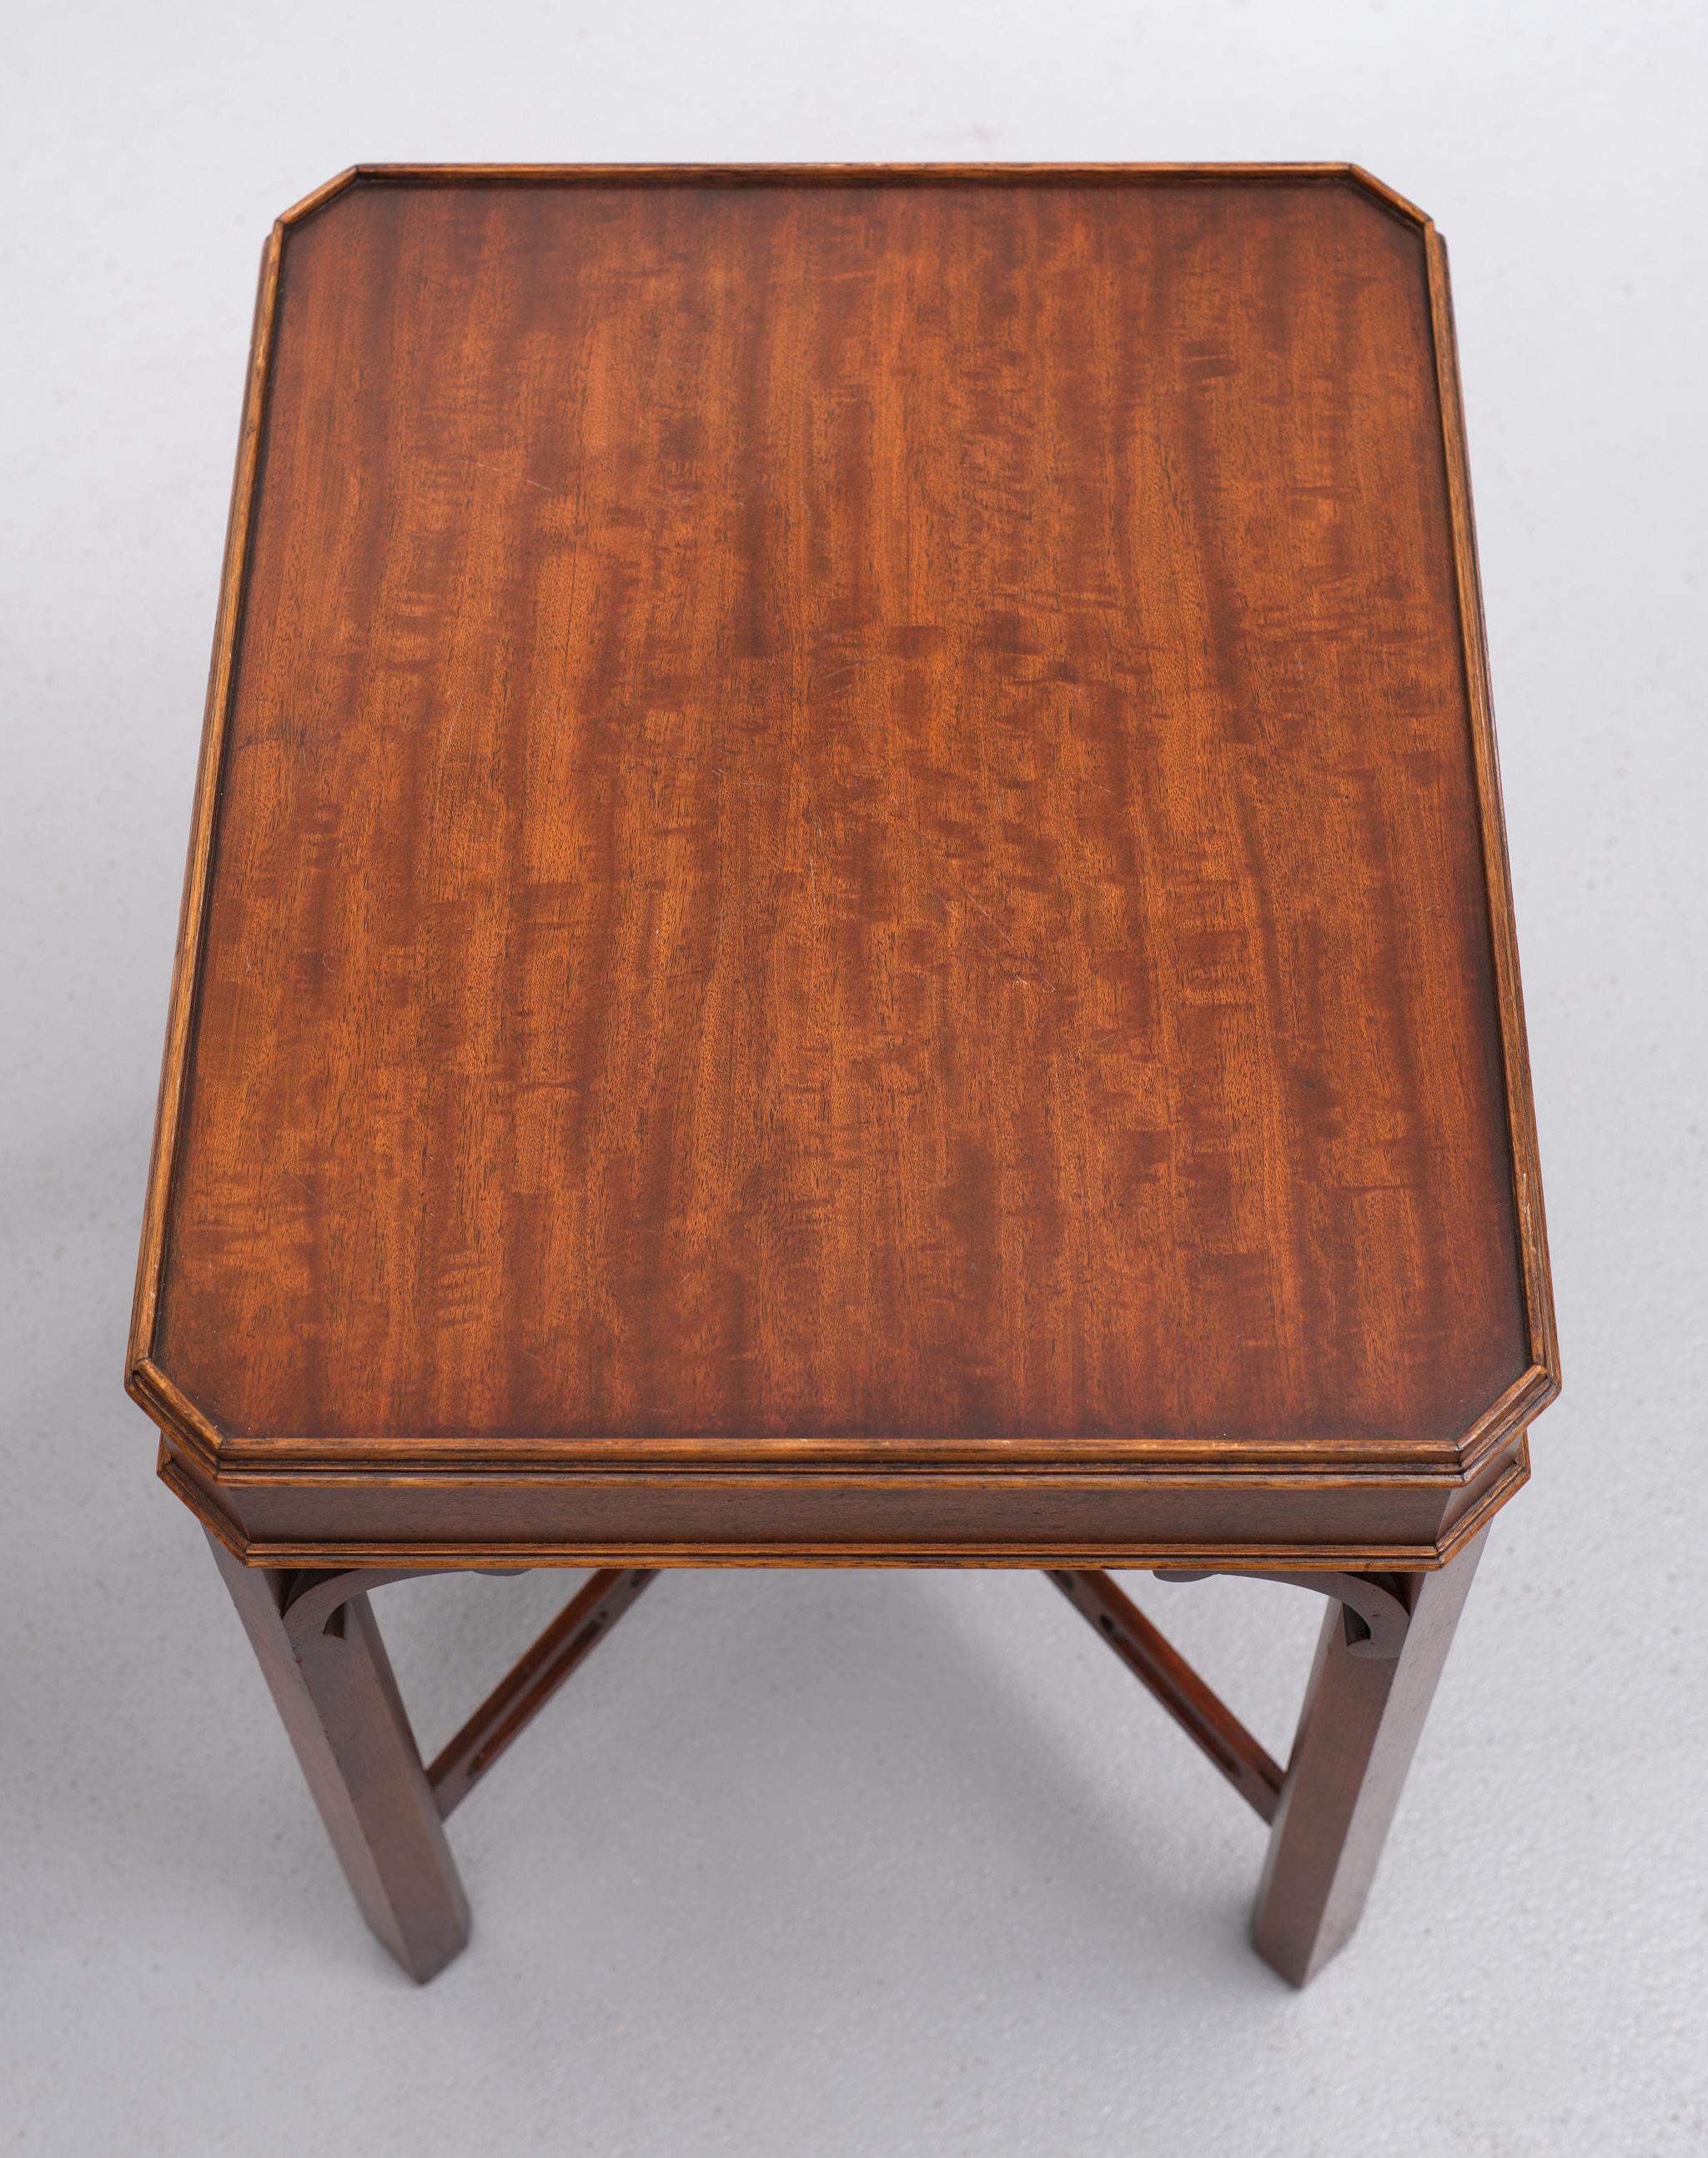 Mid-20th Century Bevan Funnell Mahogany Side Tables Georgian Revival England, 1960s For Sale